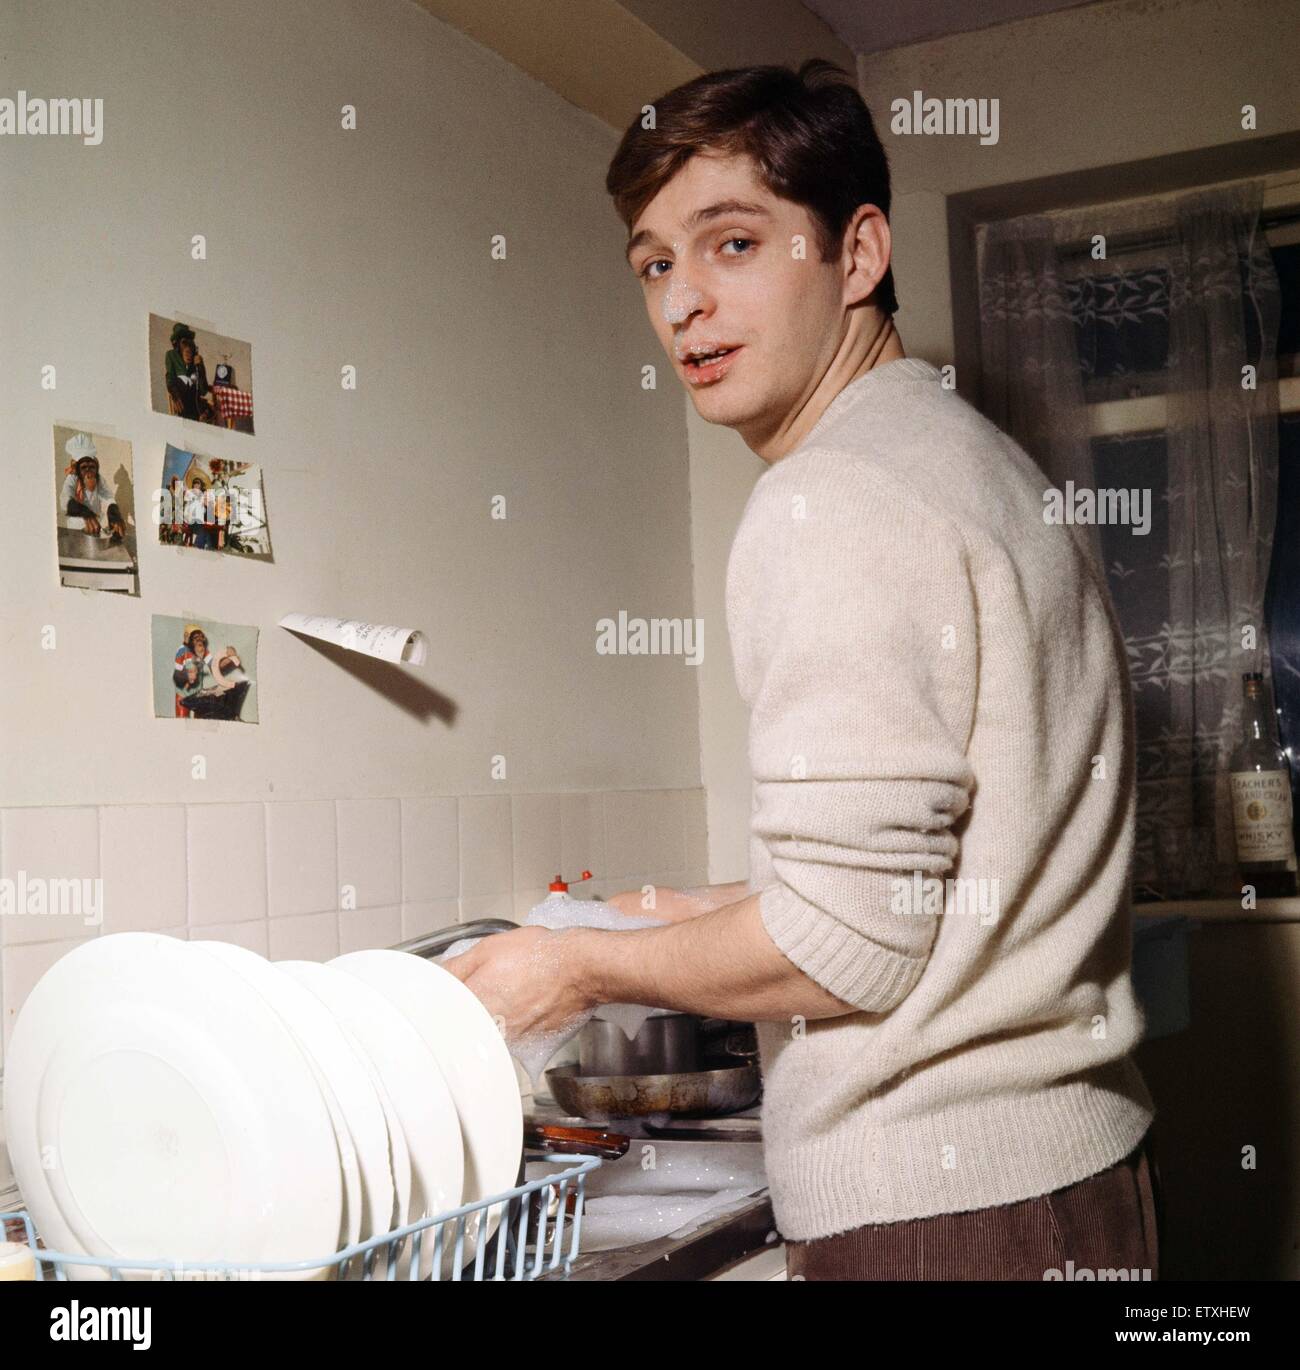 1960s 1950s SMILING MAN HUSBAND IN APRON WASHING AND DRYING DISHES IN  KITCHEN - s10163c DEB001 HARS OLD FASHION 1 TOWEL DISH ASSISTANT LIFESTYLE  STUDIO SHOT HOME LIFE COPY SPACE HALF-LENGTH DRY